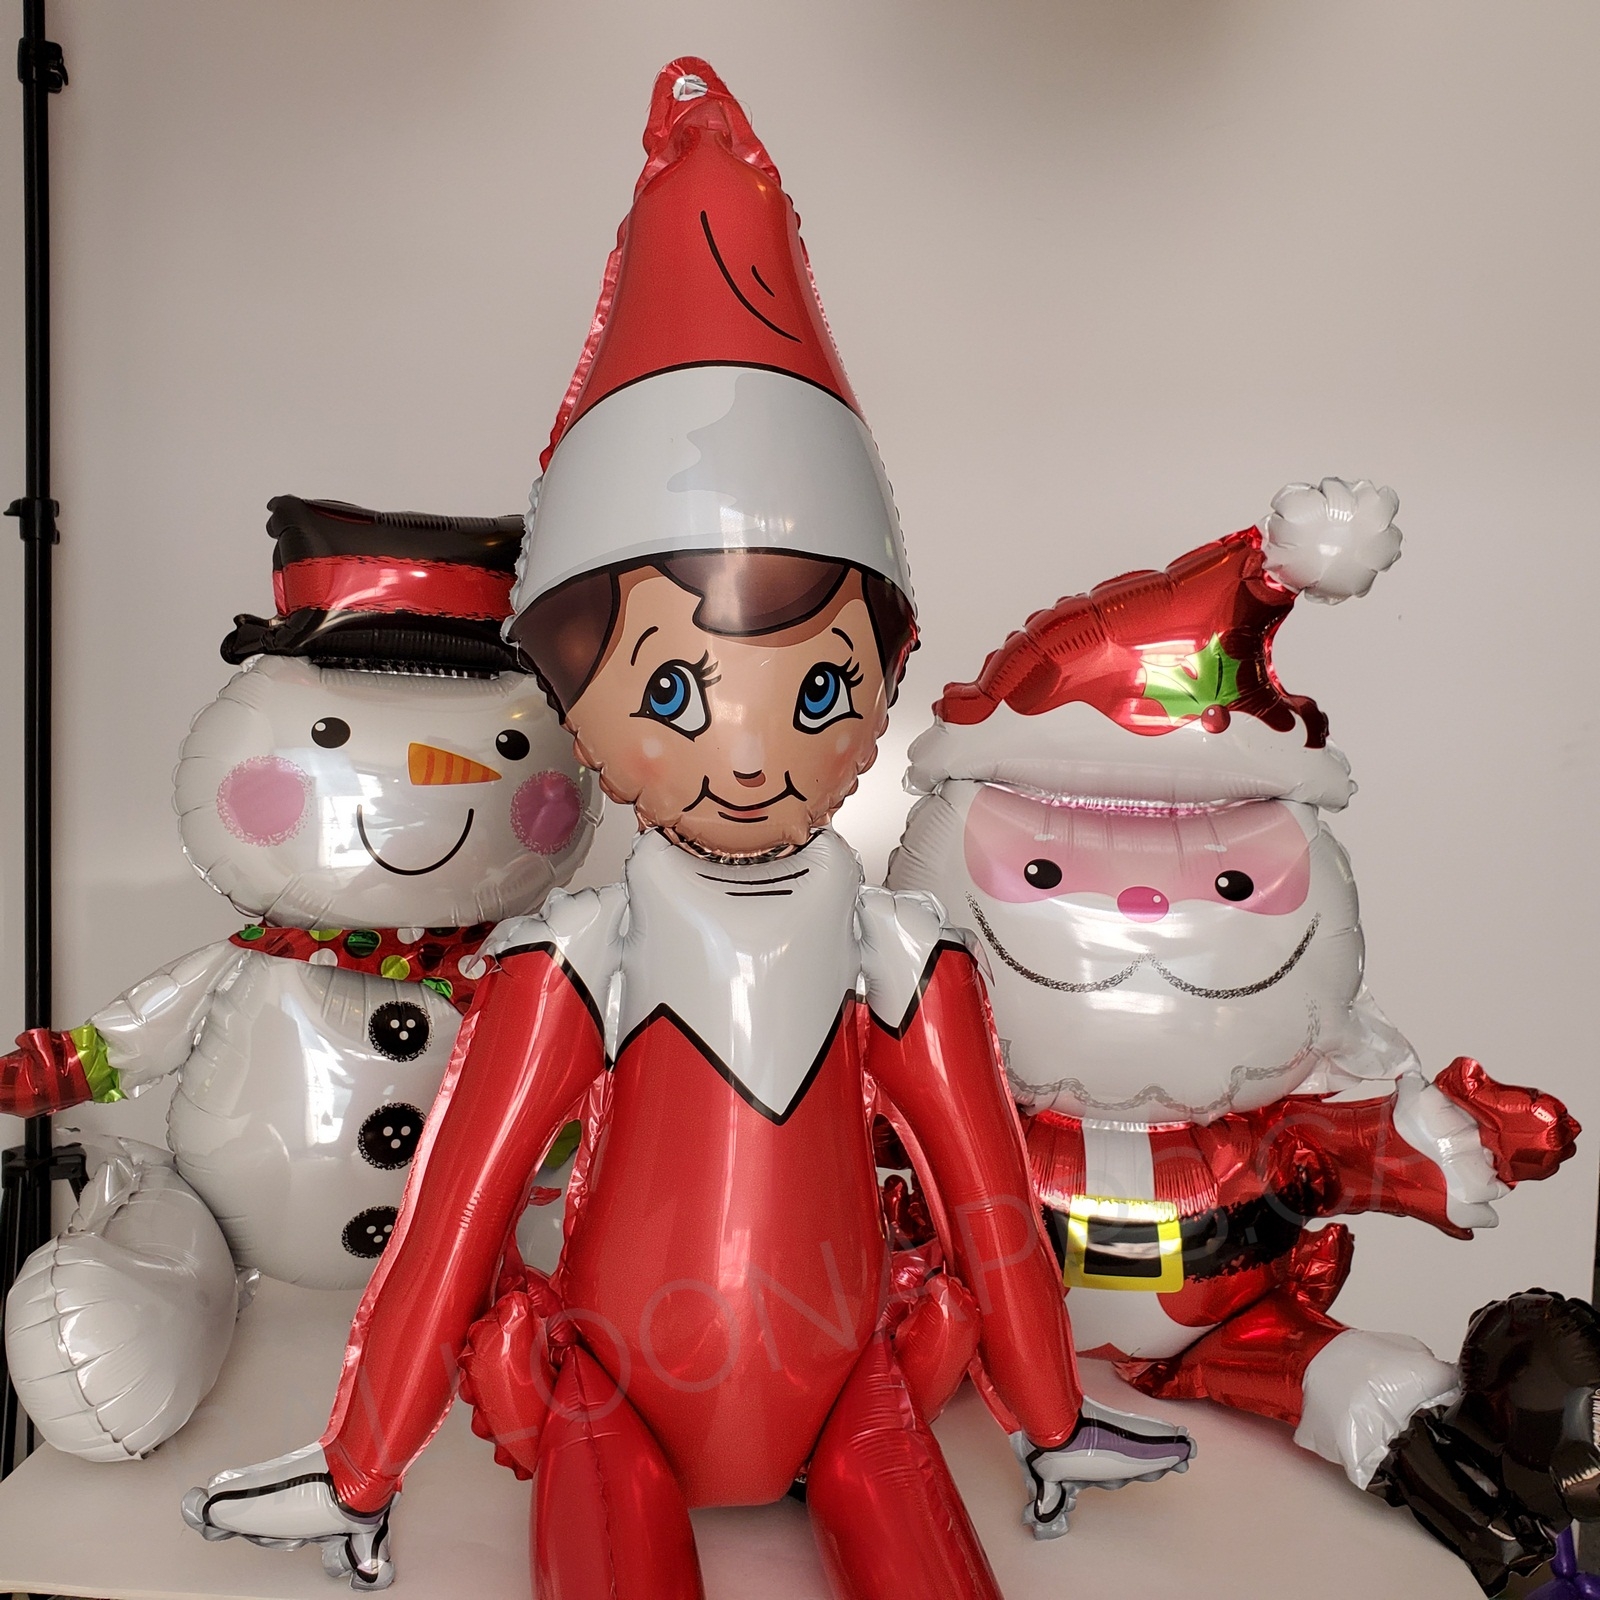 Sitting The Elf on the Shelf Self-Sealing Air-fill